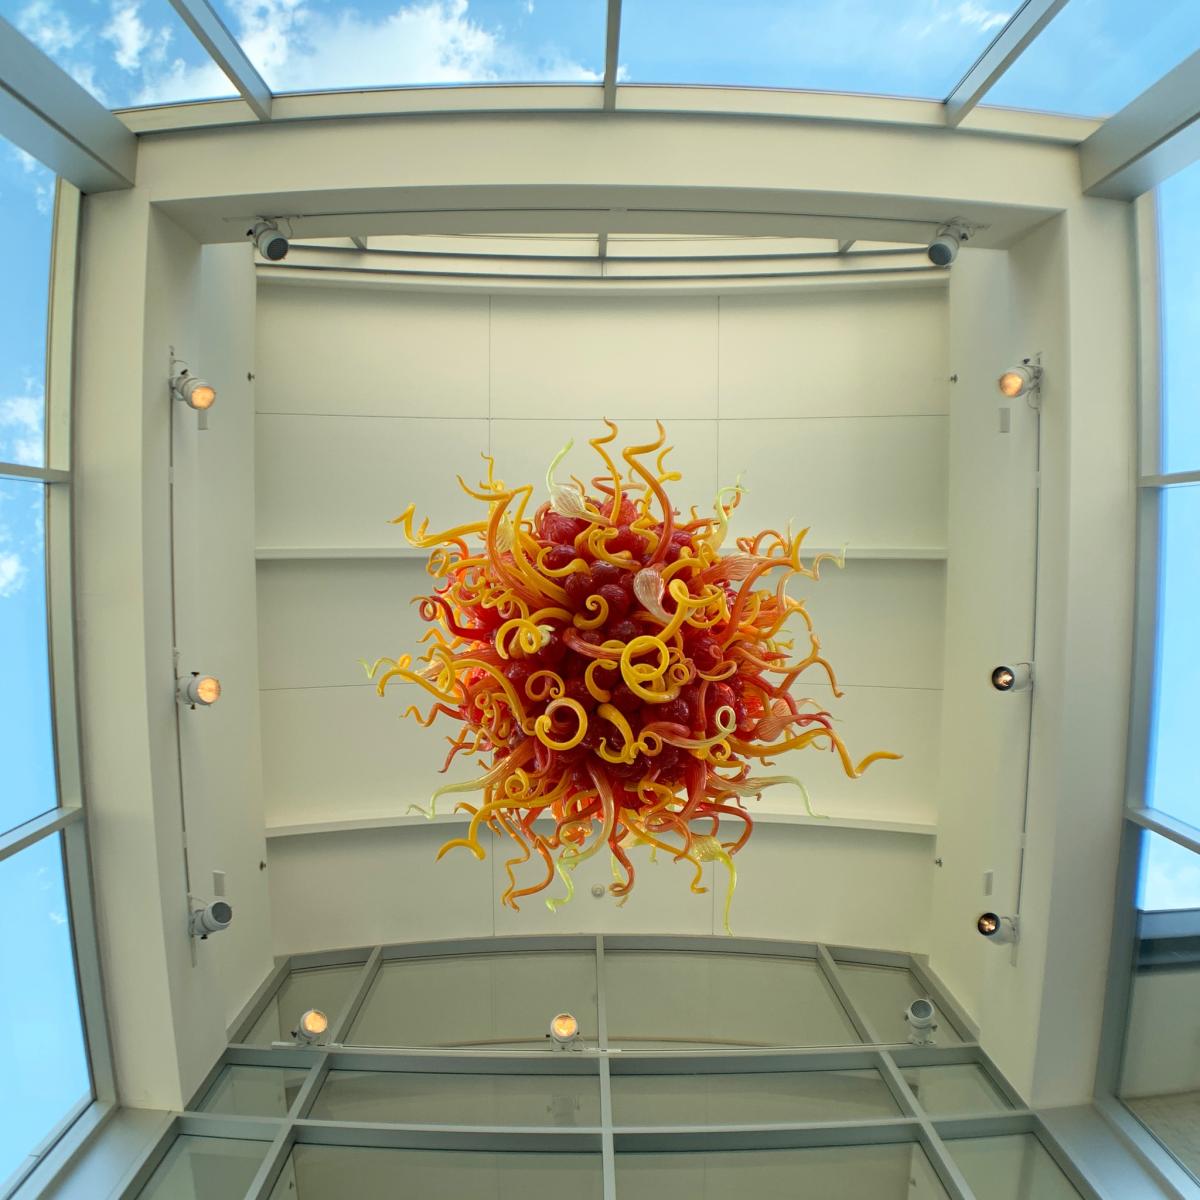 Chihuly sculpture at Kalamazoo Institute of Arts